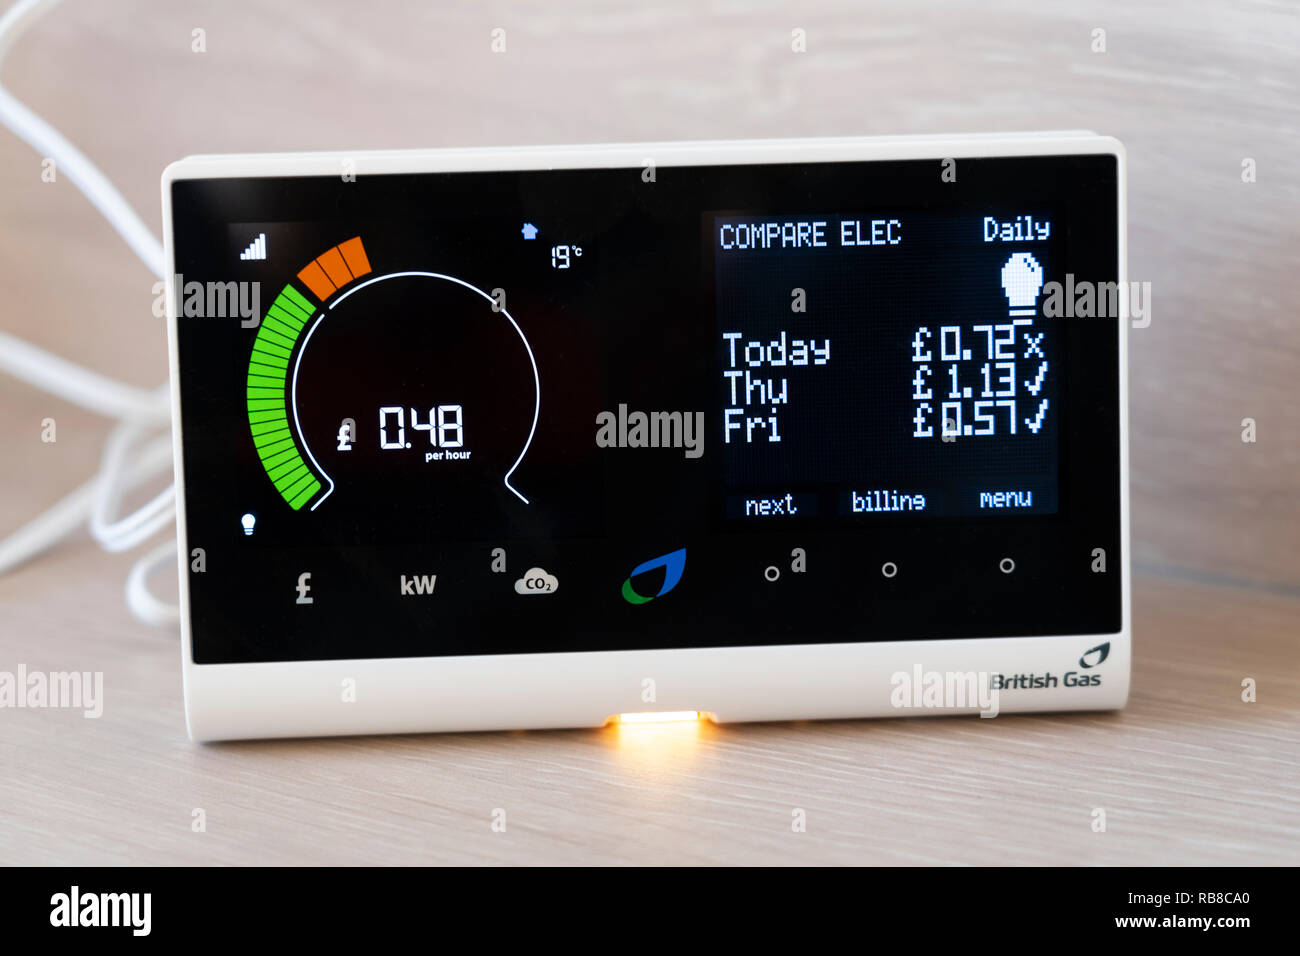 A British Gas smart meter in a home showing electricity consumption per hour and comparing with previous days usage. UK Stock Photo